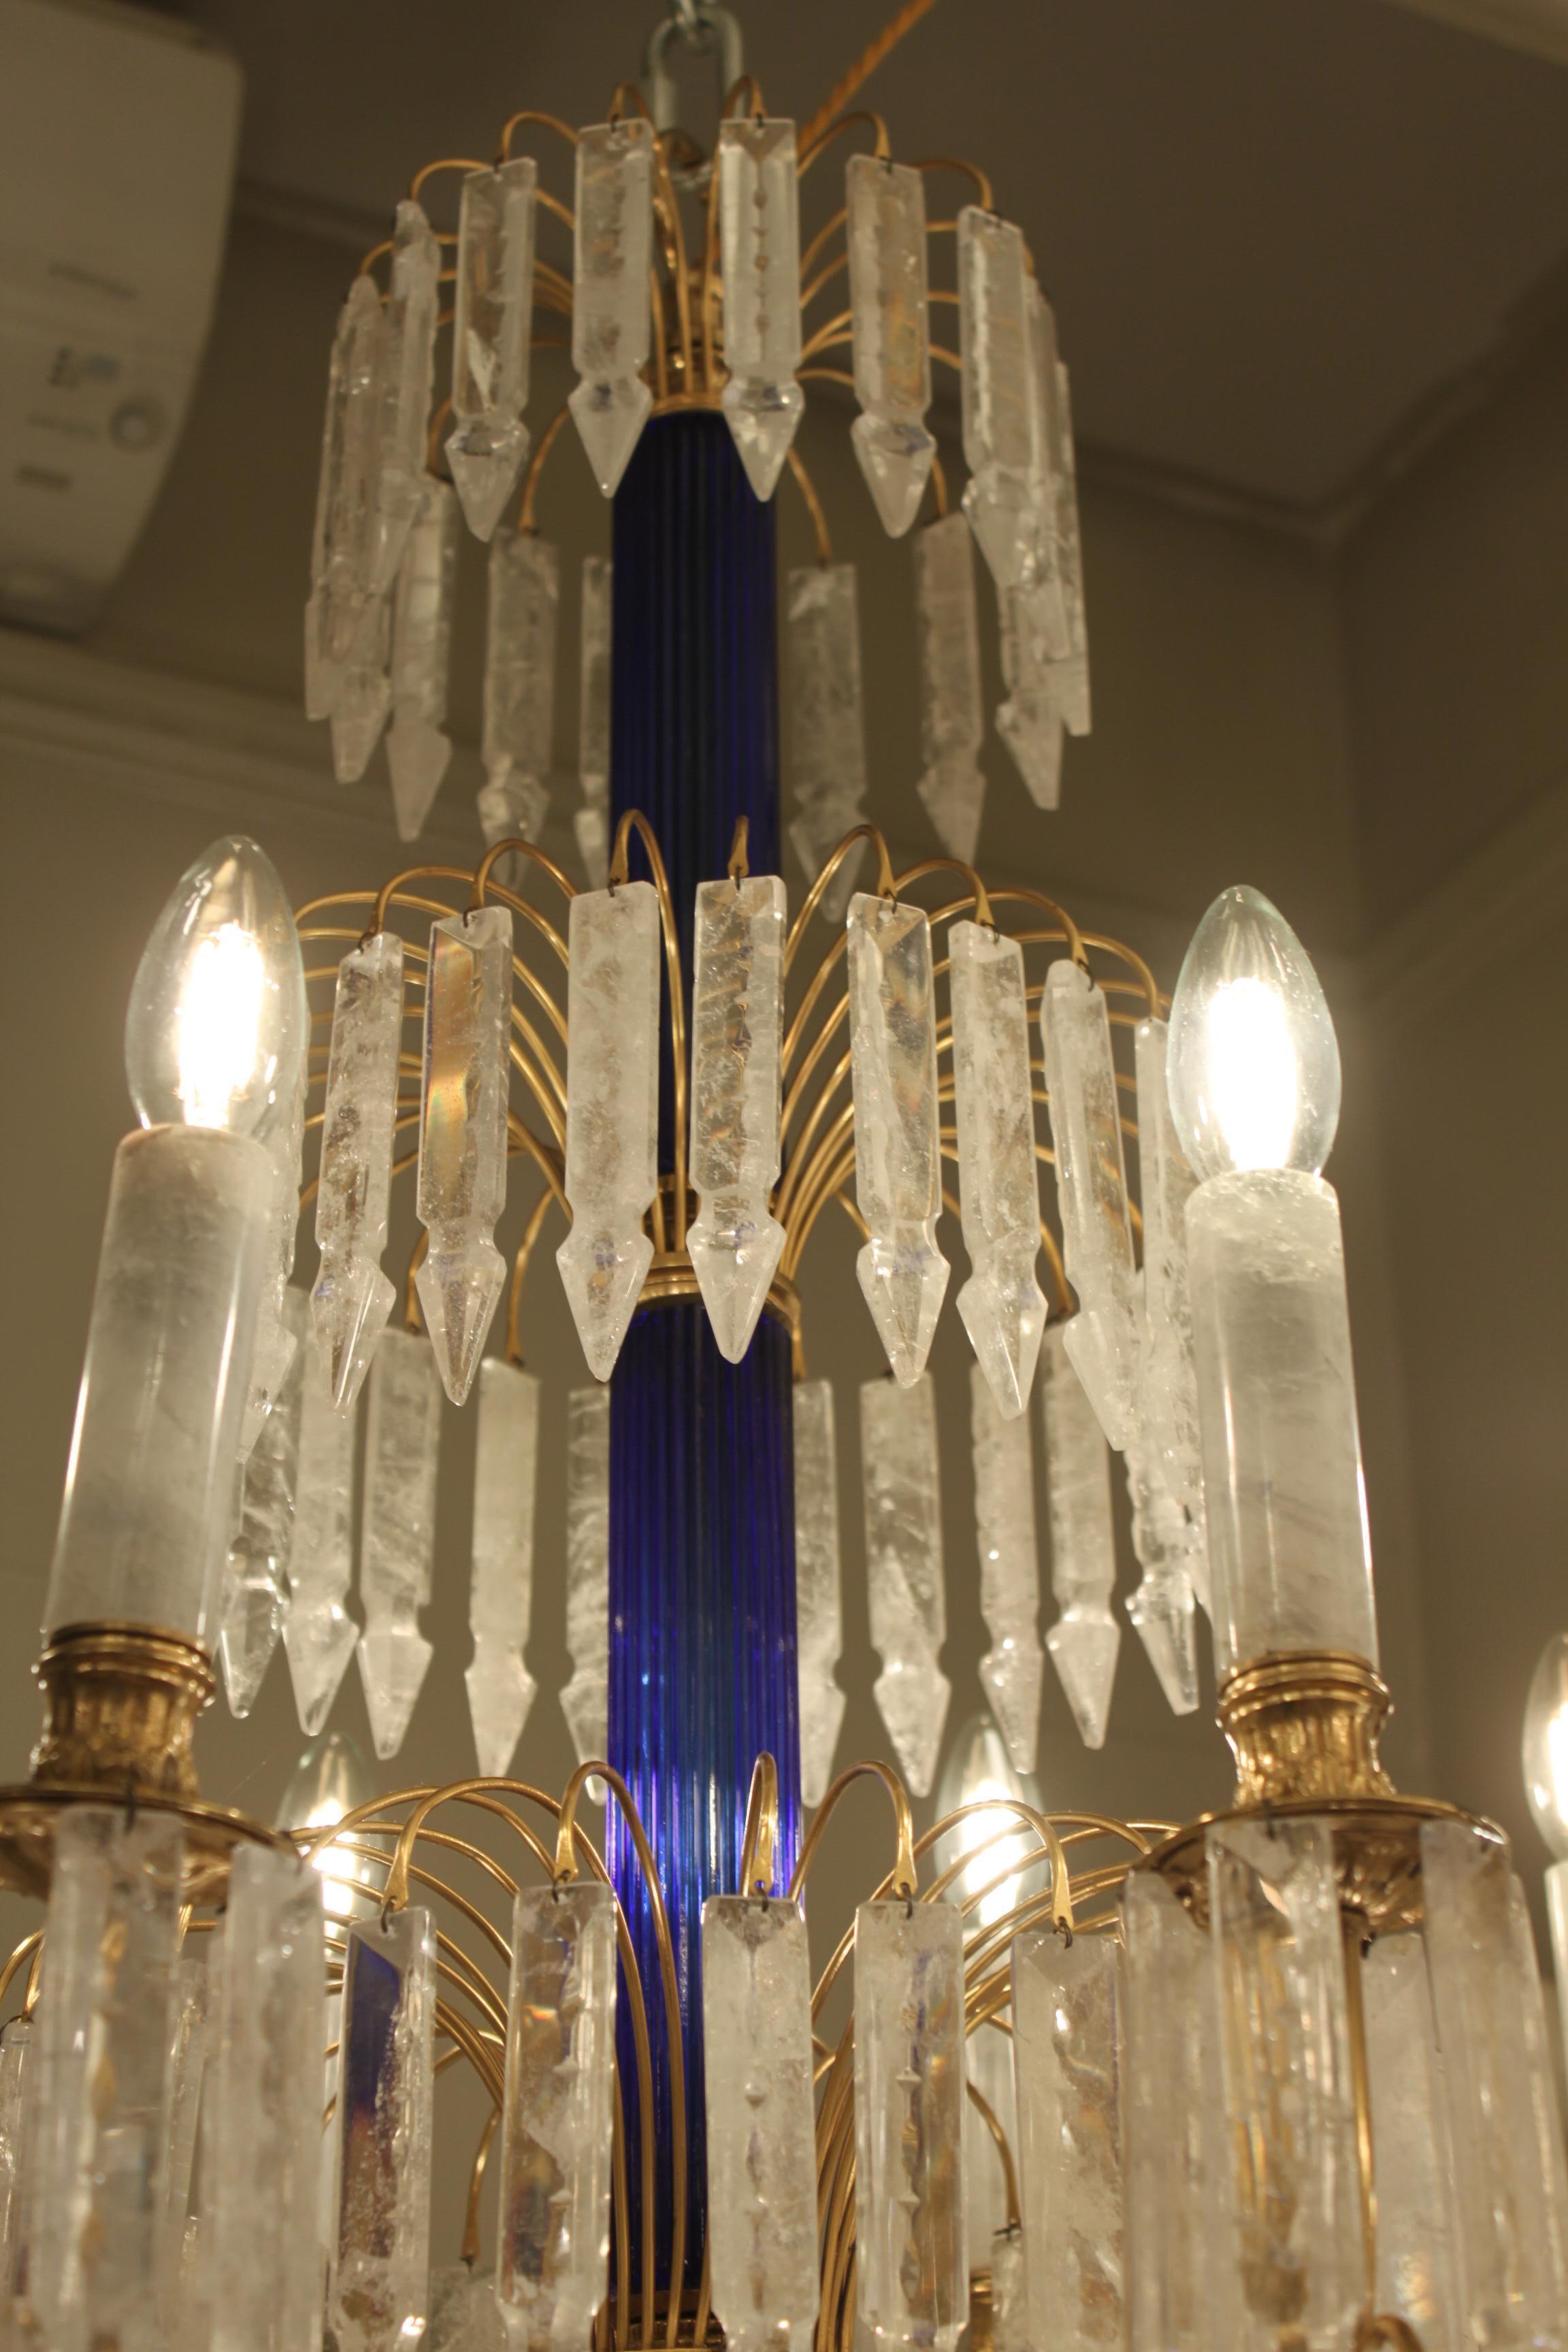 A beautiful Baltic style chandelier with cobolt blue corrugated crystal stem rising to an upper crown festooned with rock crystal myrzahs. A secondary broader lower ring of the same, beneath which is a wider ring of 8 outswept arms each terminating